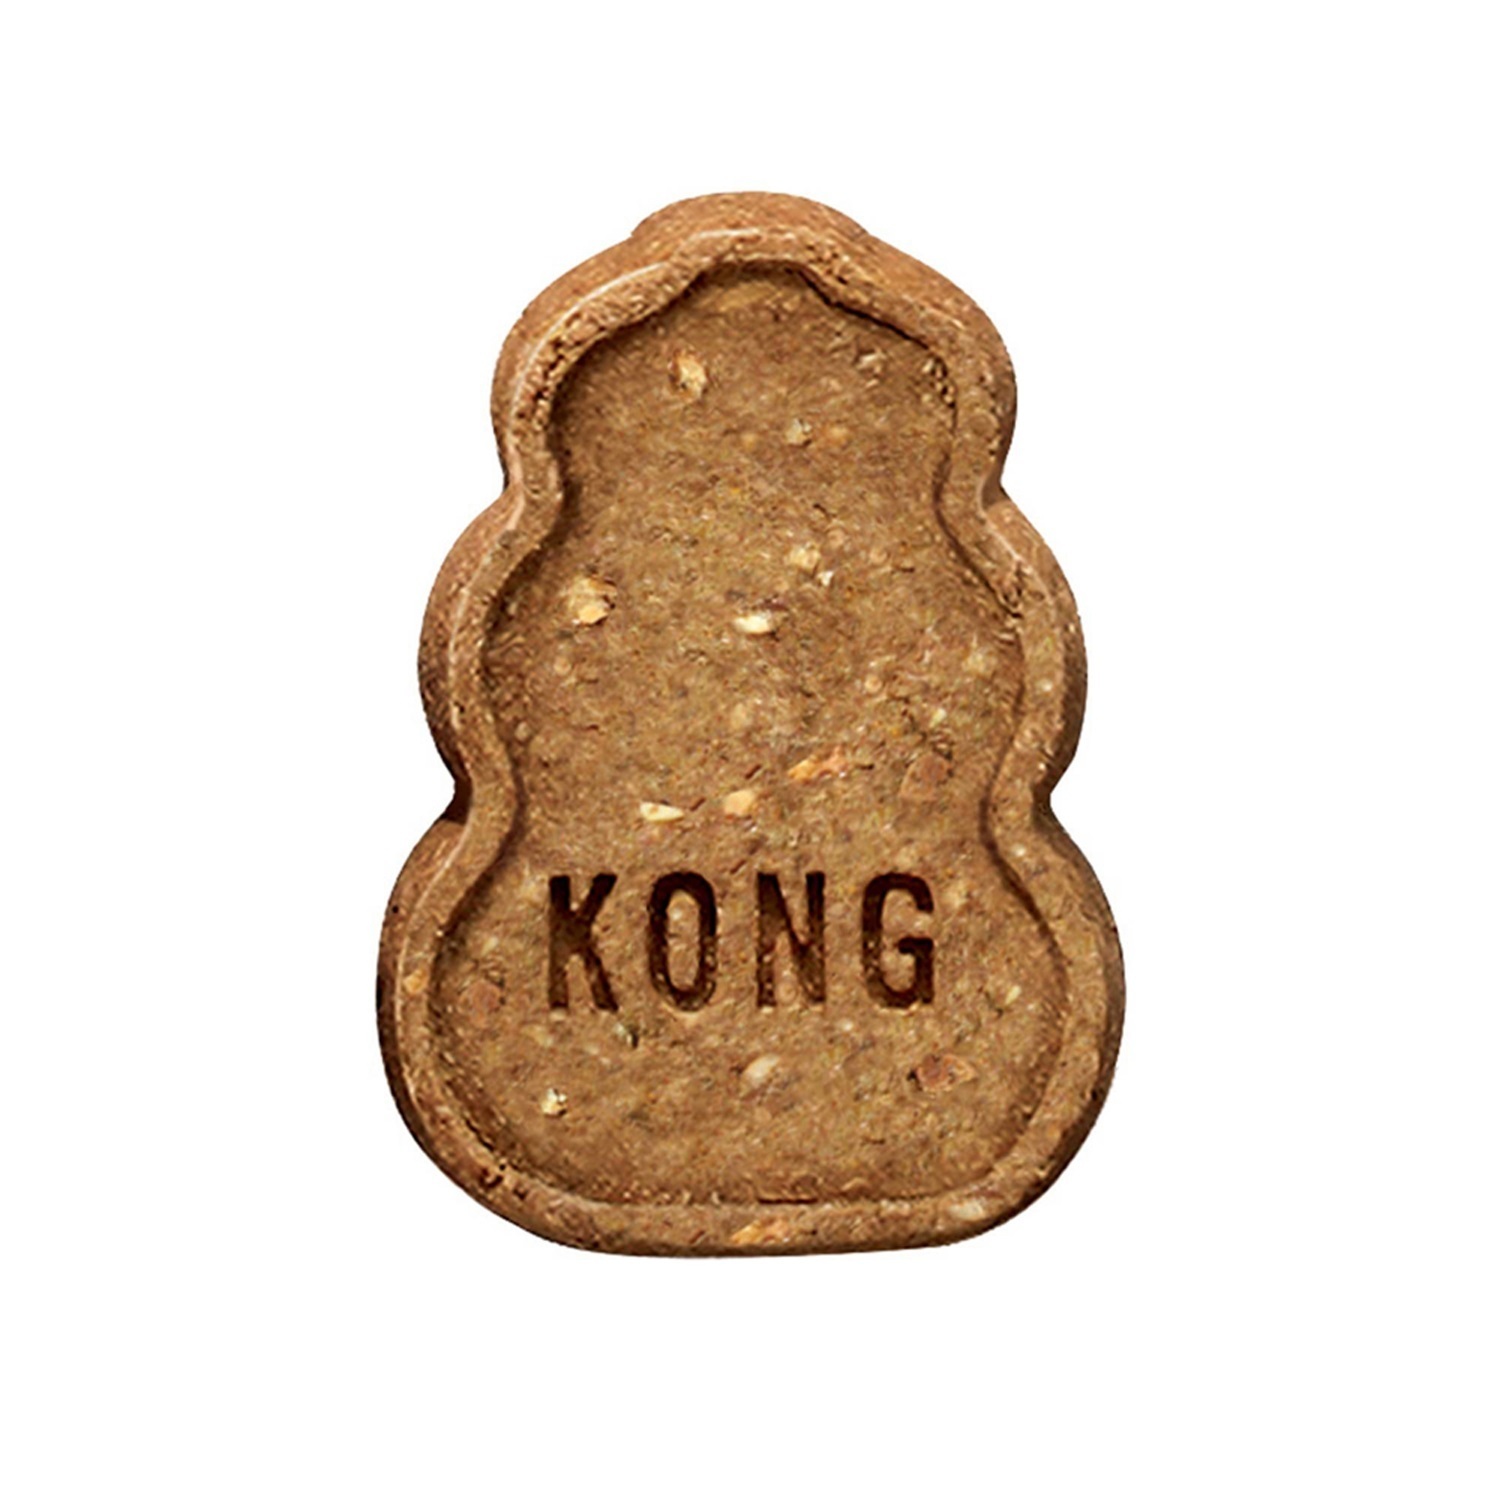 KONG Stuff'n Peanut Butter Biscuit Snacks for Medium-Large Dogs 300g - 1 Unit/s image 0